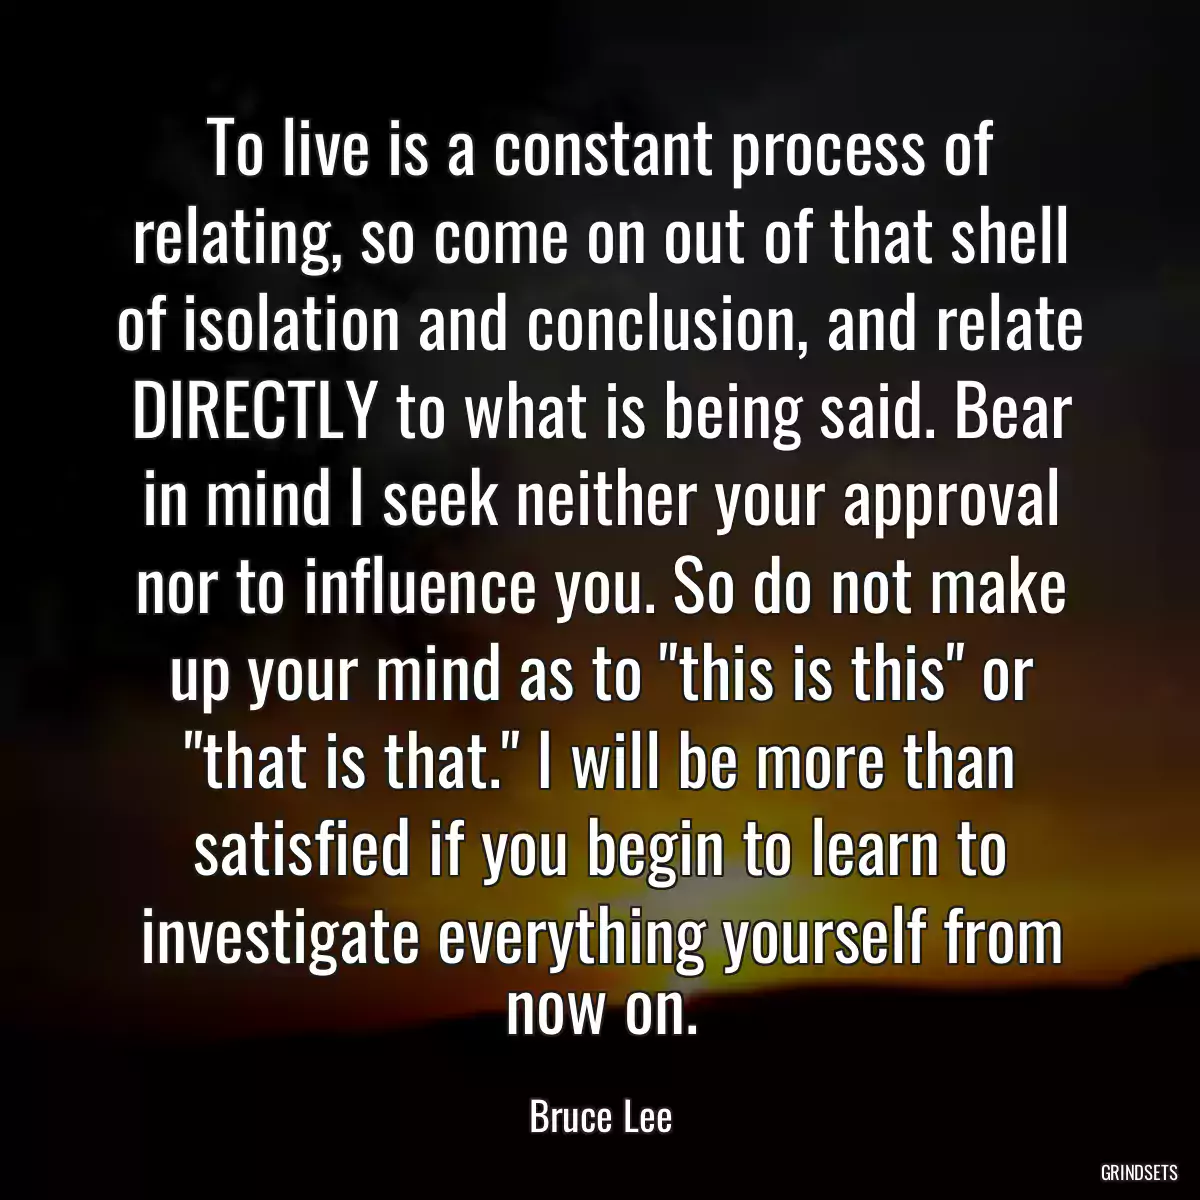 To live is a constant process of relating, so come on out of that shell of isolation and conclusion, and relate DIRECTLY to what is being said. Bear in mind I seek neither your approval nor to influence you. So do not make up your mind as to \